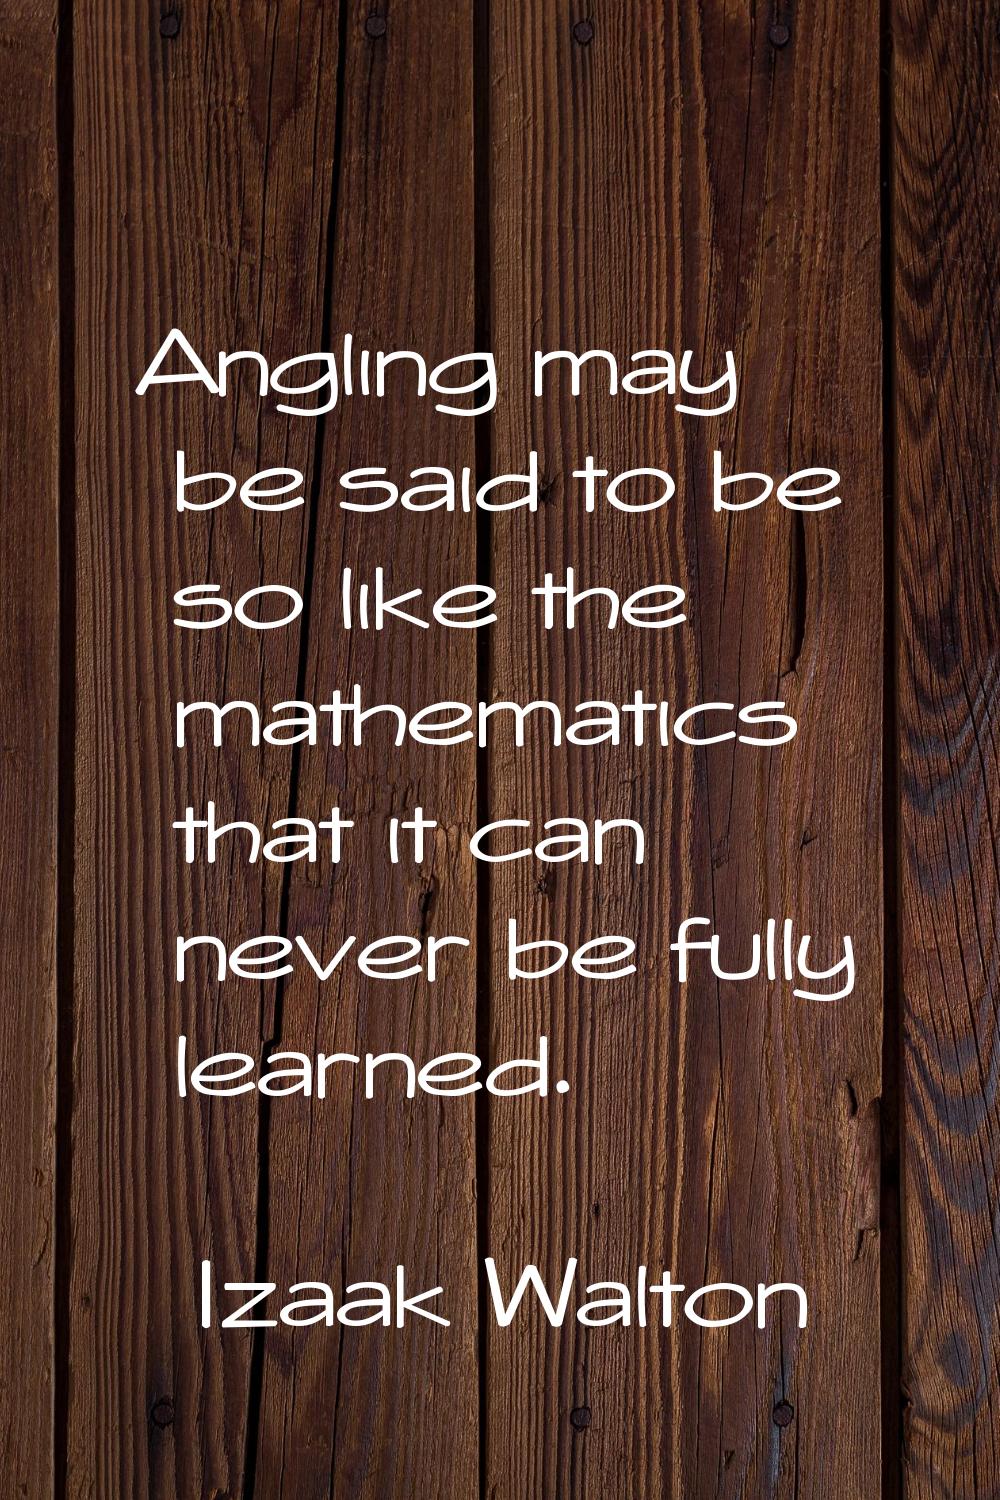 Angling may be said to be so like the mathematics that it can never be fully learned.